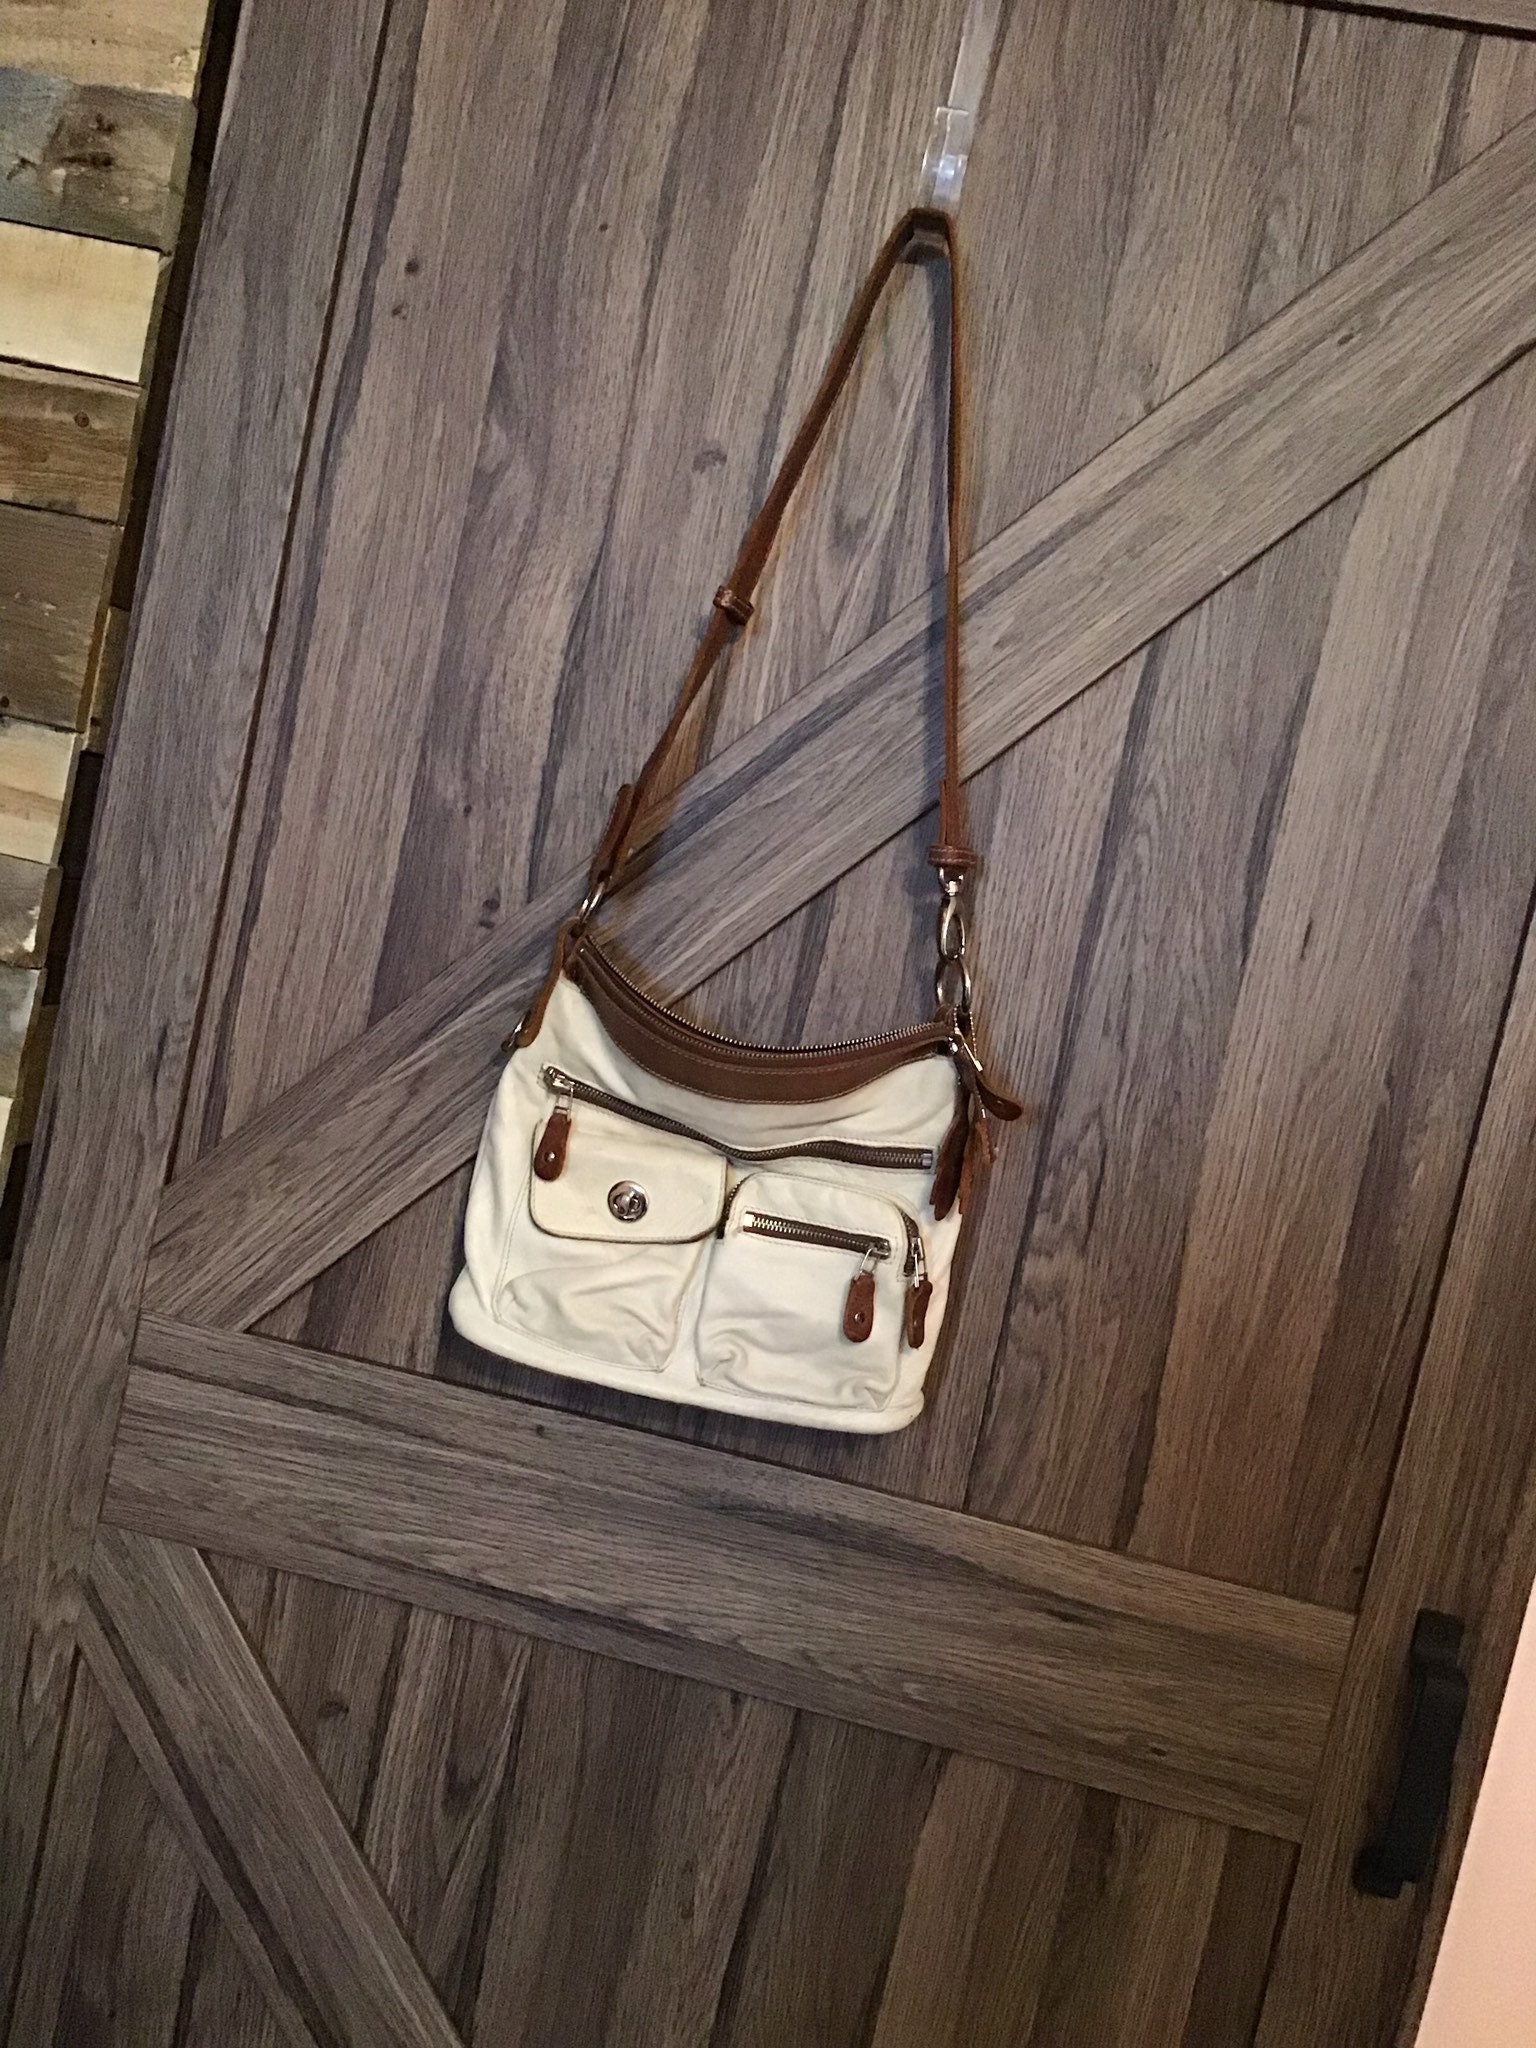 White and tan leather Roots crossbody purse Vintage Roots bag | Etsy